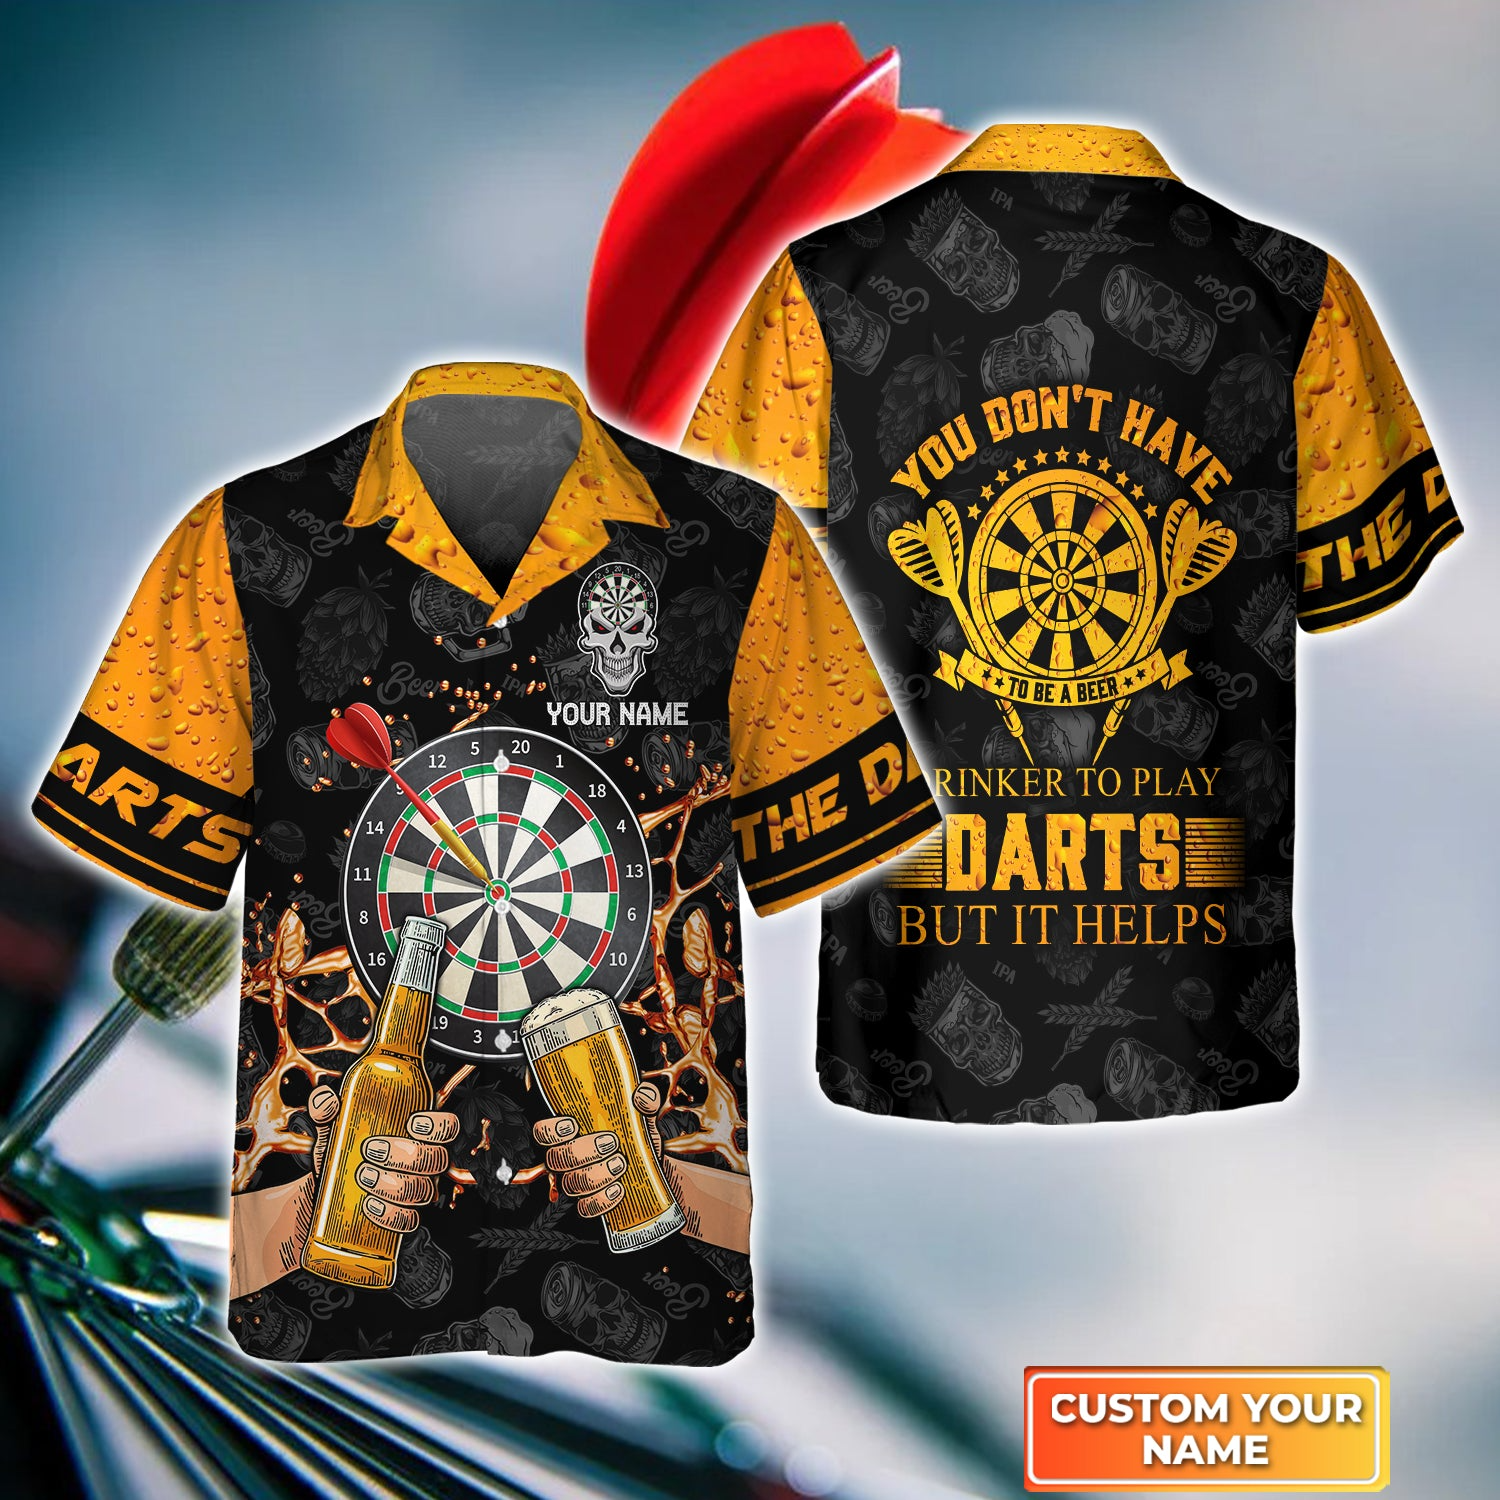 Personalized Beer & Darts Hawaiian Shirt - Custom Name You Don't Have To Be A Beer Drinker To Play Darts Hawaiian Shirts For Darts Lovers